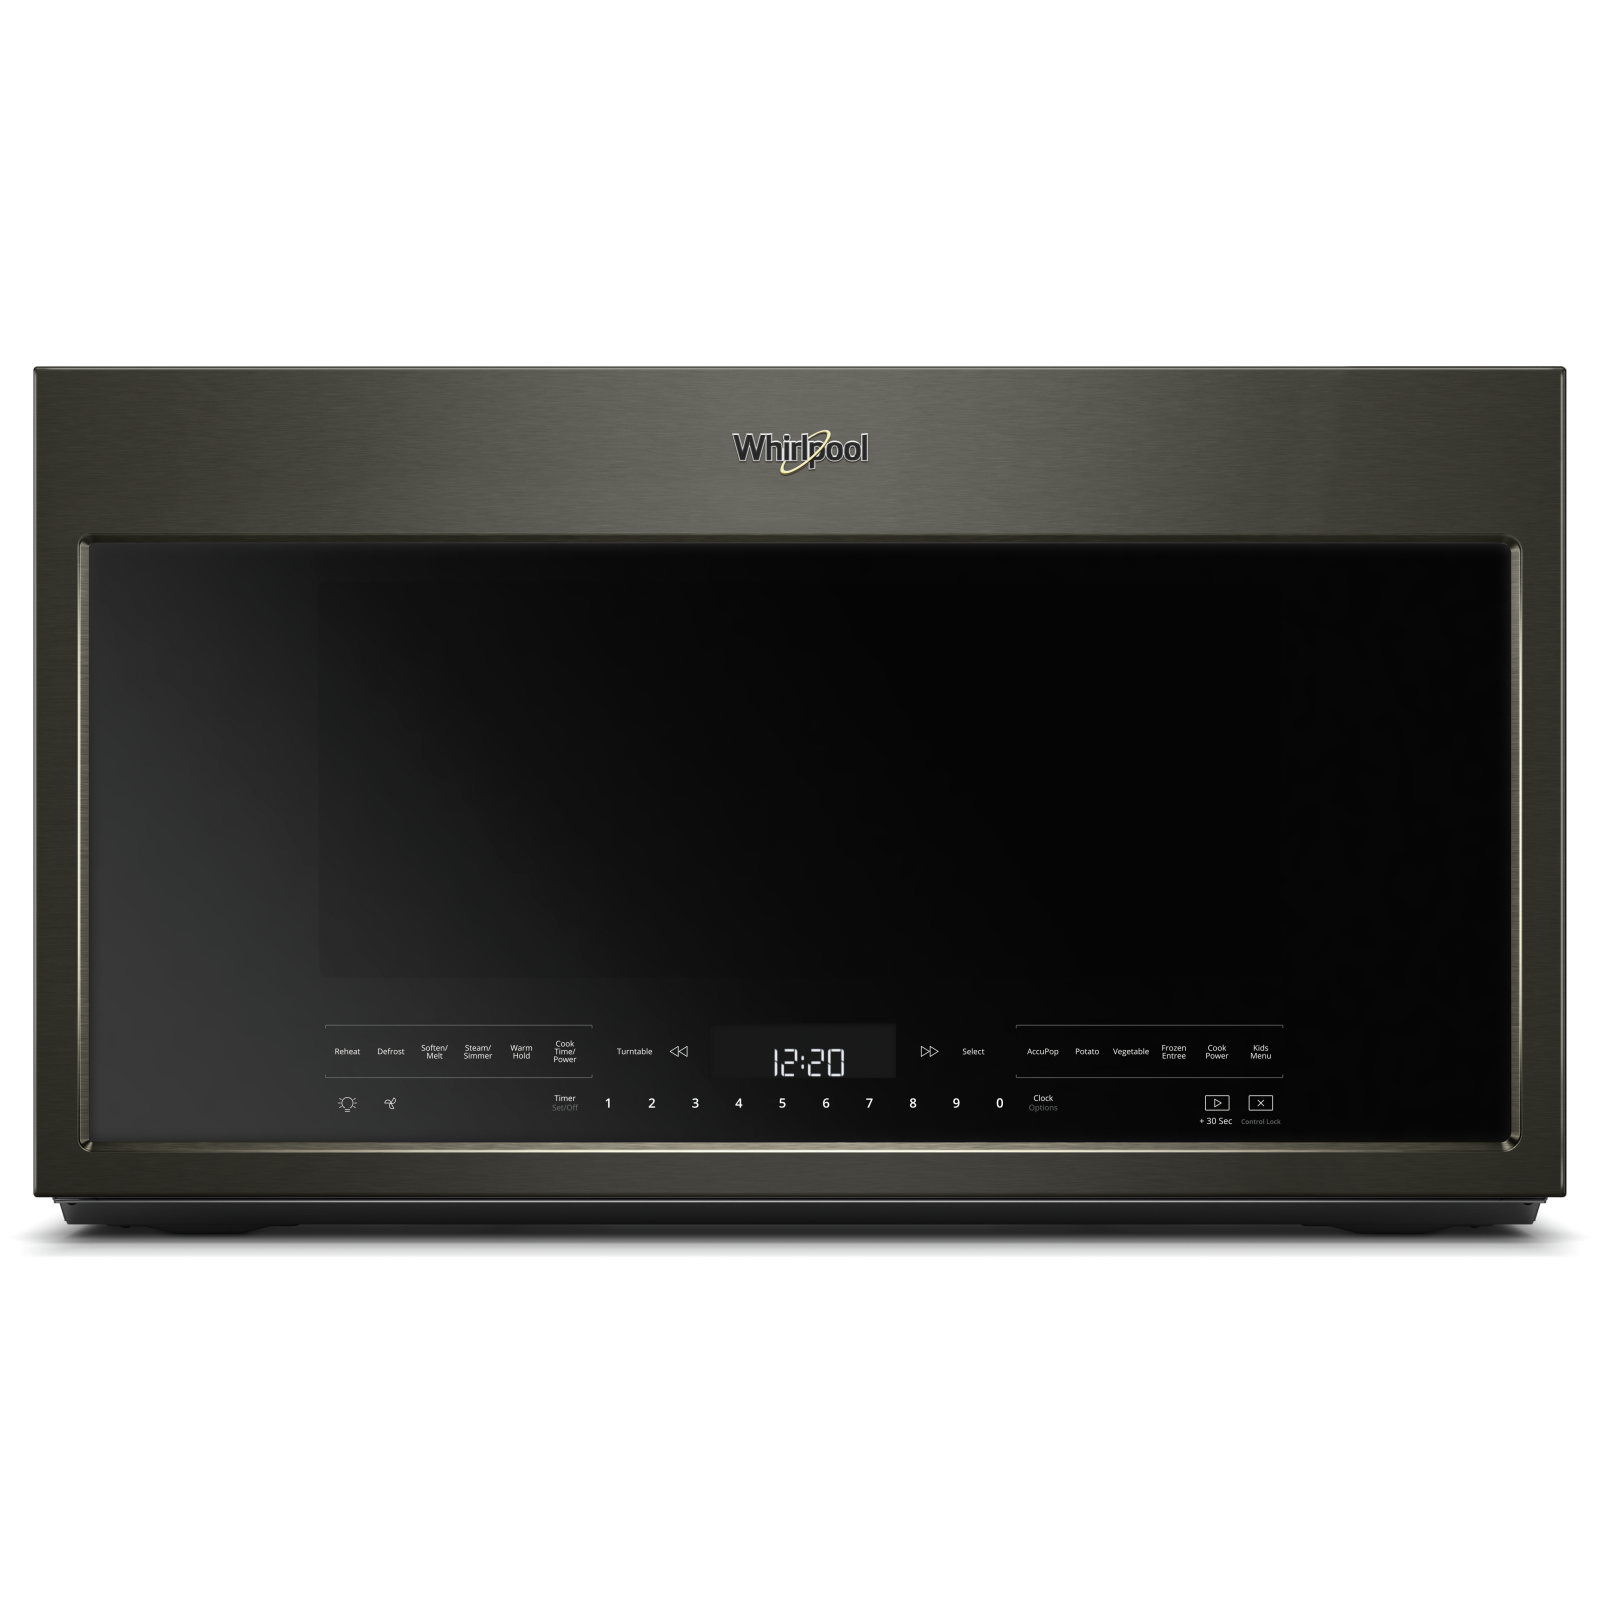 Whirlpool - 2.1 cu. Ft  Over the range Microwave in Black Stainless - YWMH75021HV